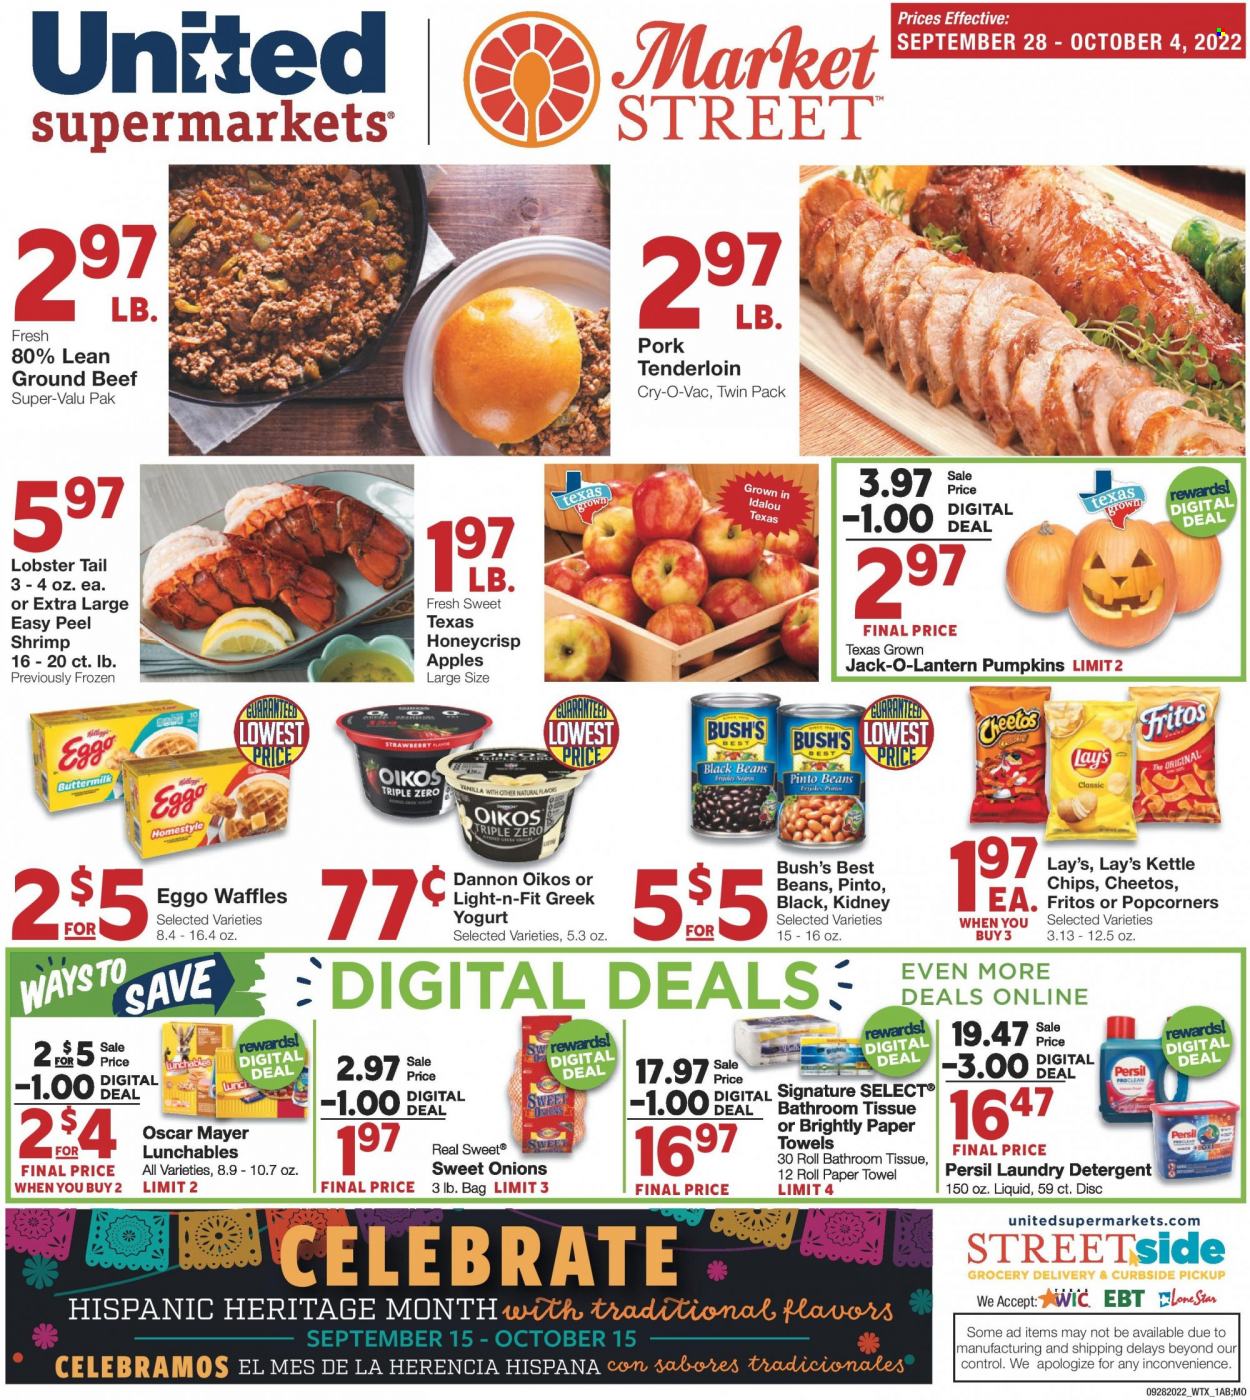 thumbnail - United Supermarkets Flyer - 09/28/2022 - 10/04/2022 - Sales products - waffles, pumpkin, apples, beef meat, ground beef, pork meat, pork tenderloin, lobster, lobster tail, shrimps, Lunchables, Oscar Mayer, greek yoghurt, yoghurt, Oikos, Dannon, buttermilk, Kellogg's, Fritos, Cheetos, Lay’s, popcorn, black beans, pinto beans, bath tissue, kitchen towels, paper towels, detergent, Persil, laundry detergent. Page 1.